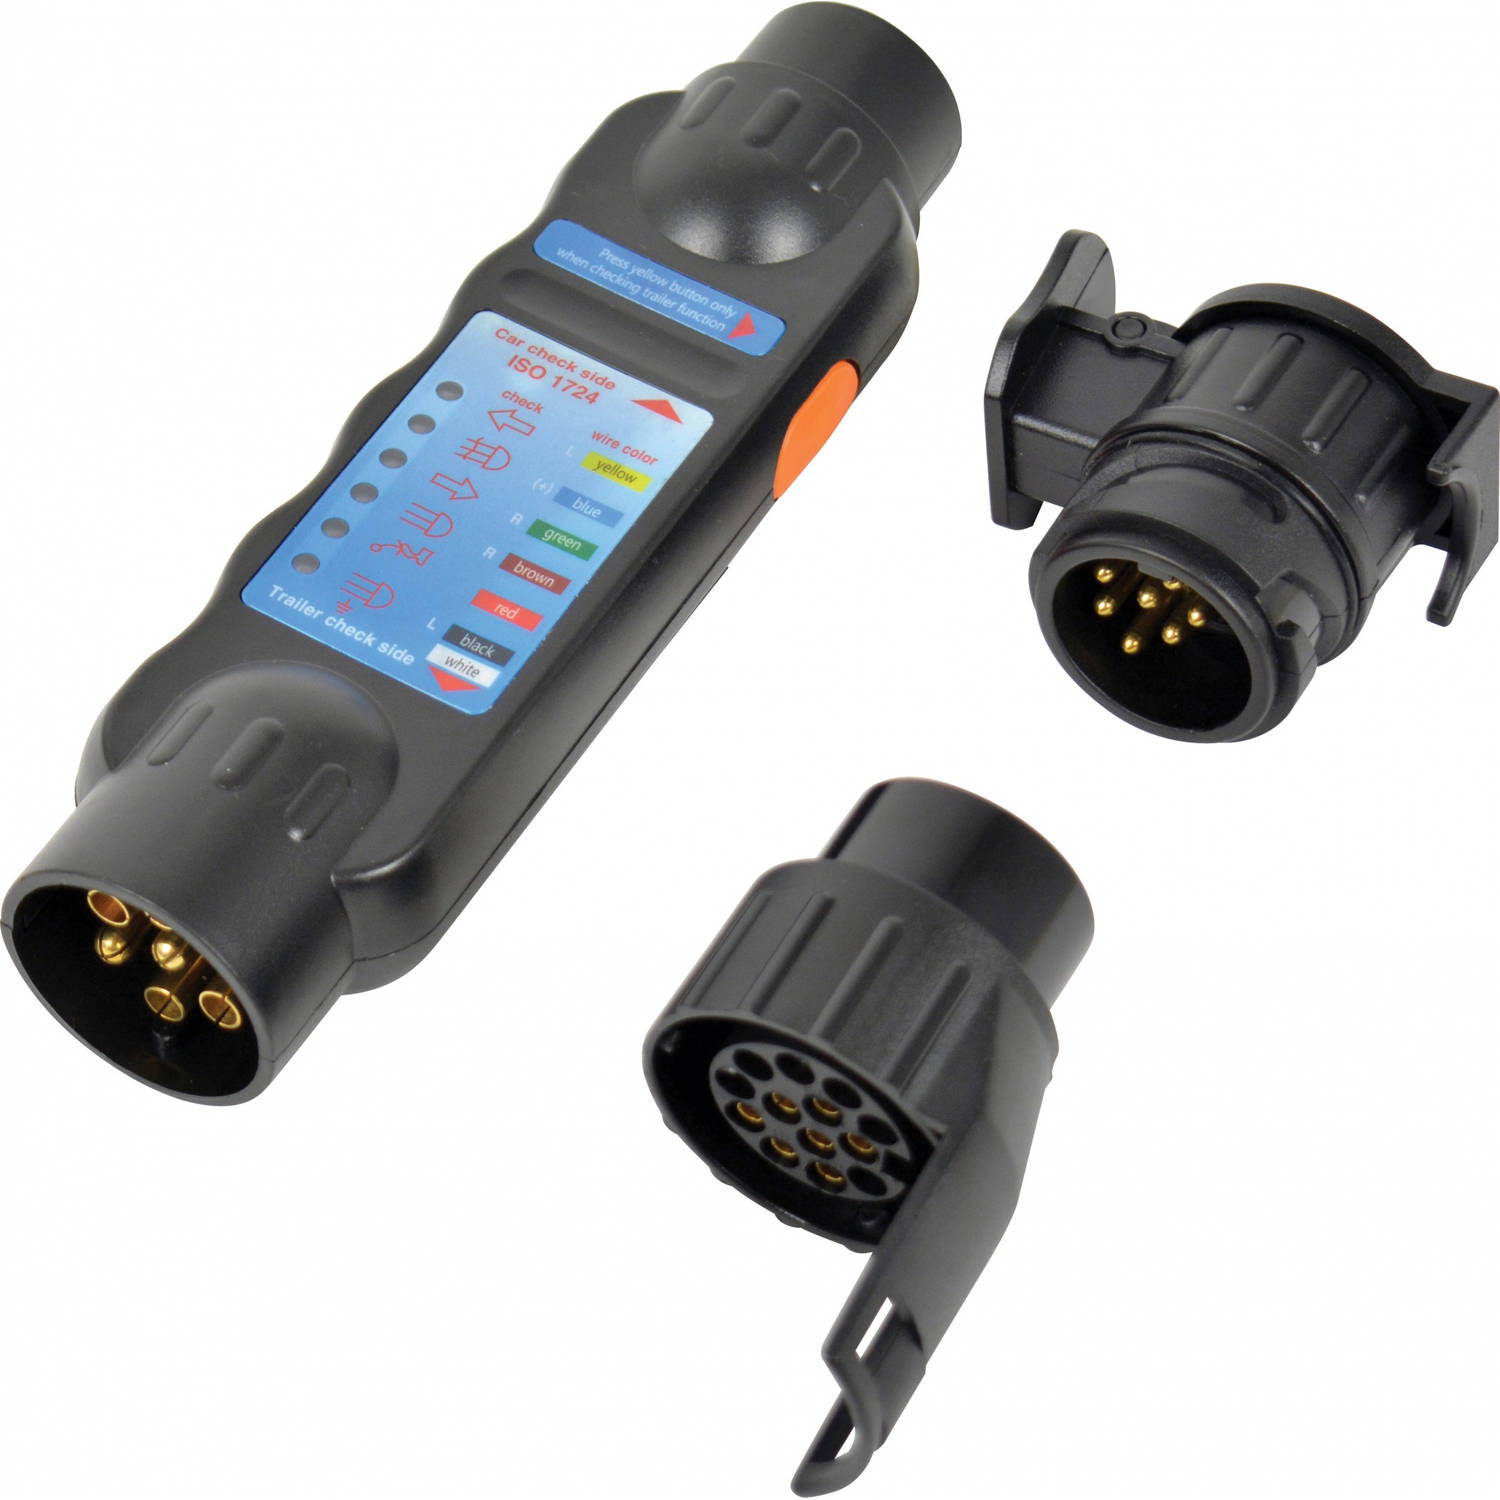 Carpoint Testerkit 3-in-1 +2 adapters